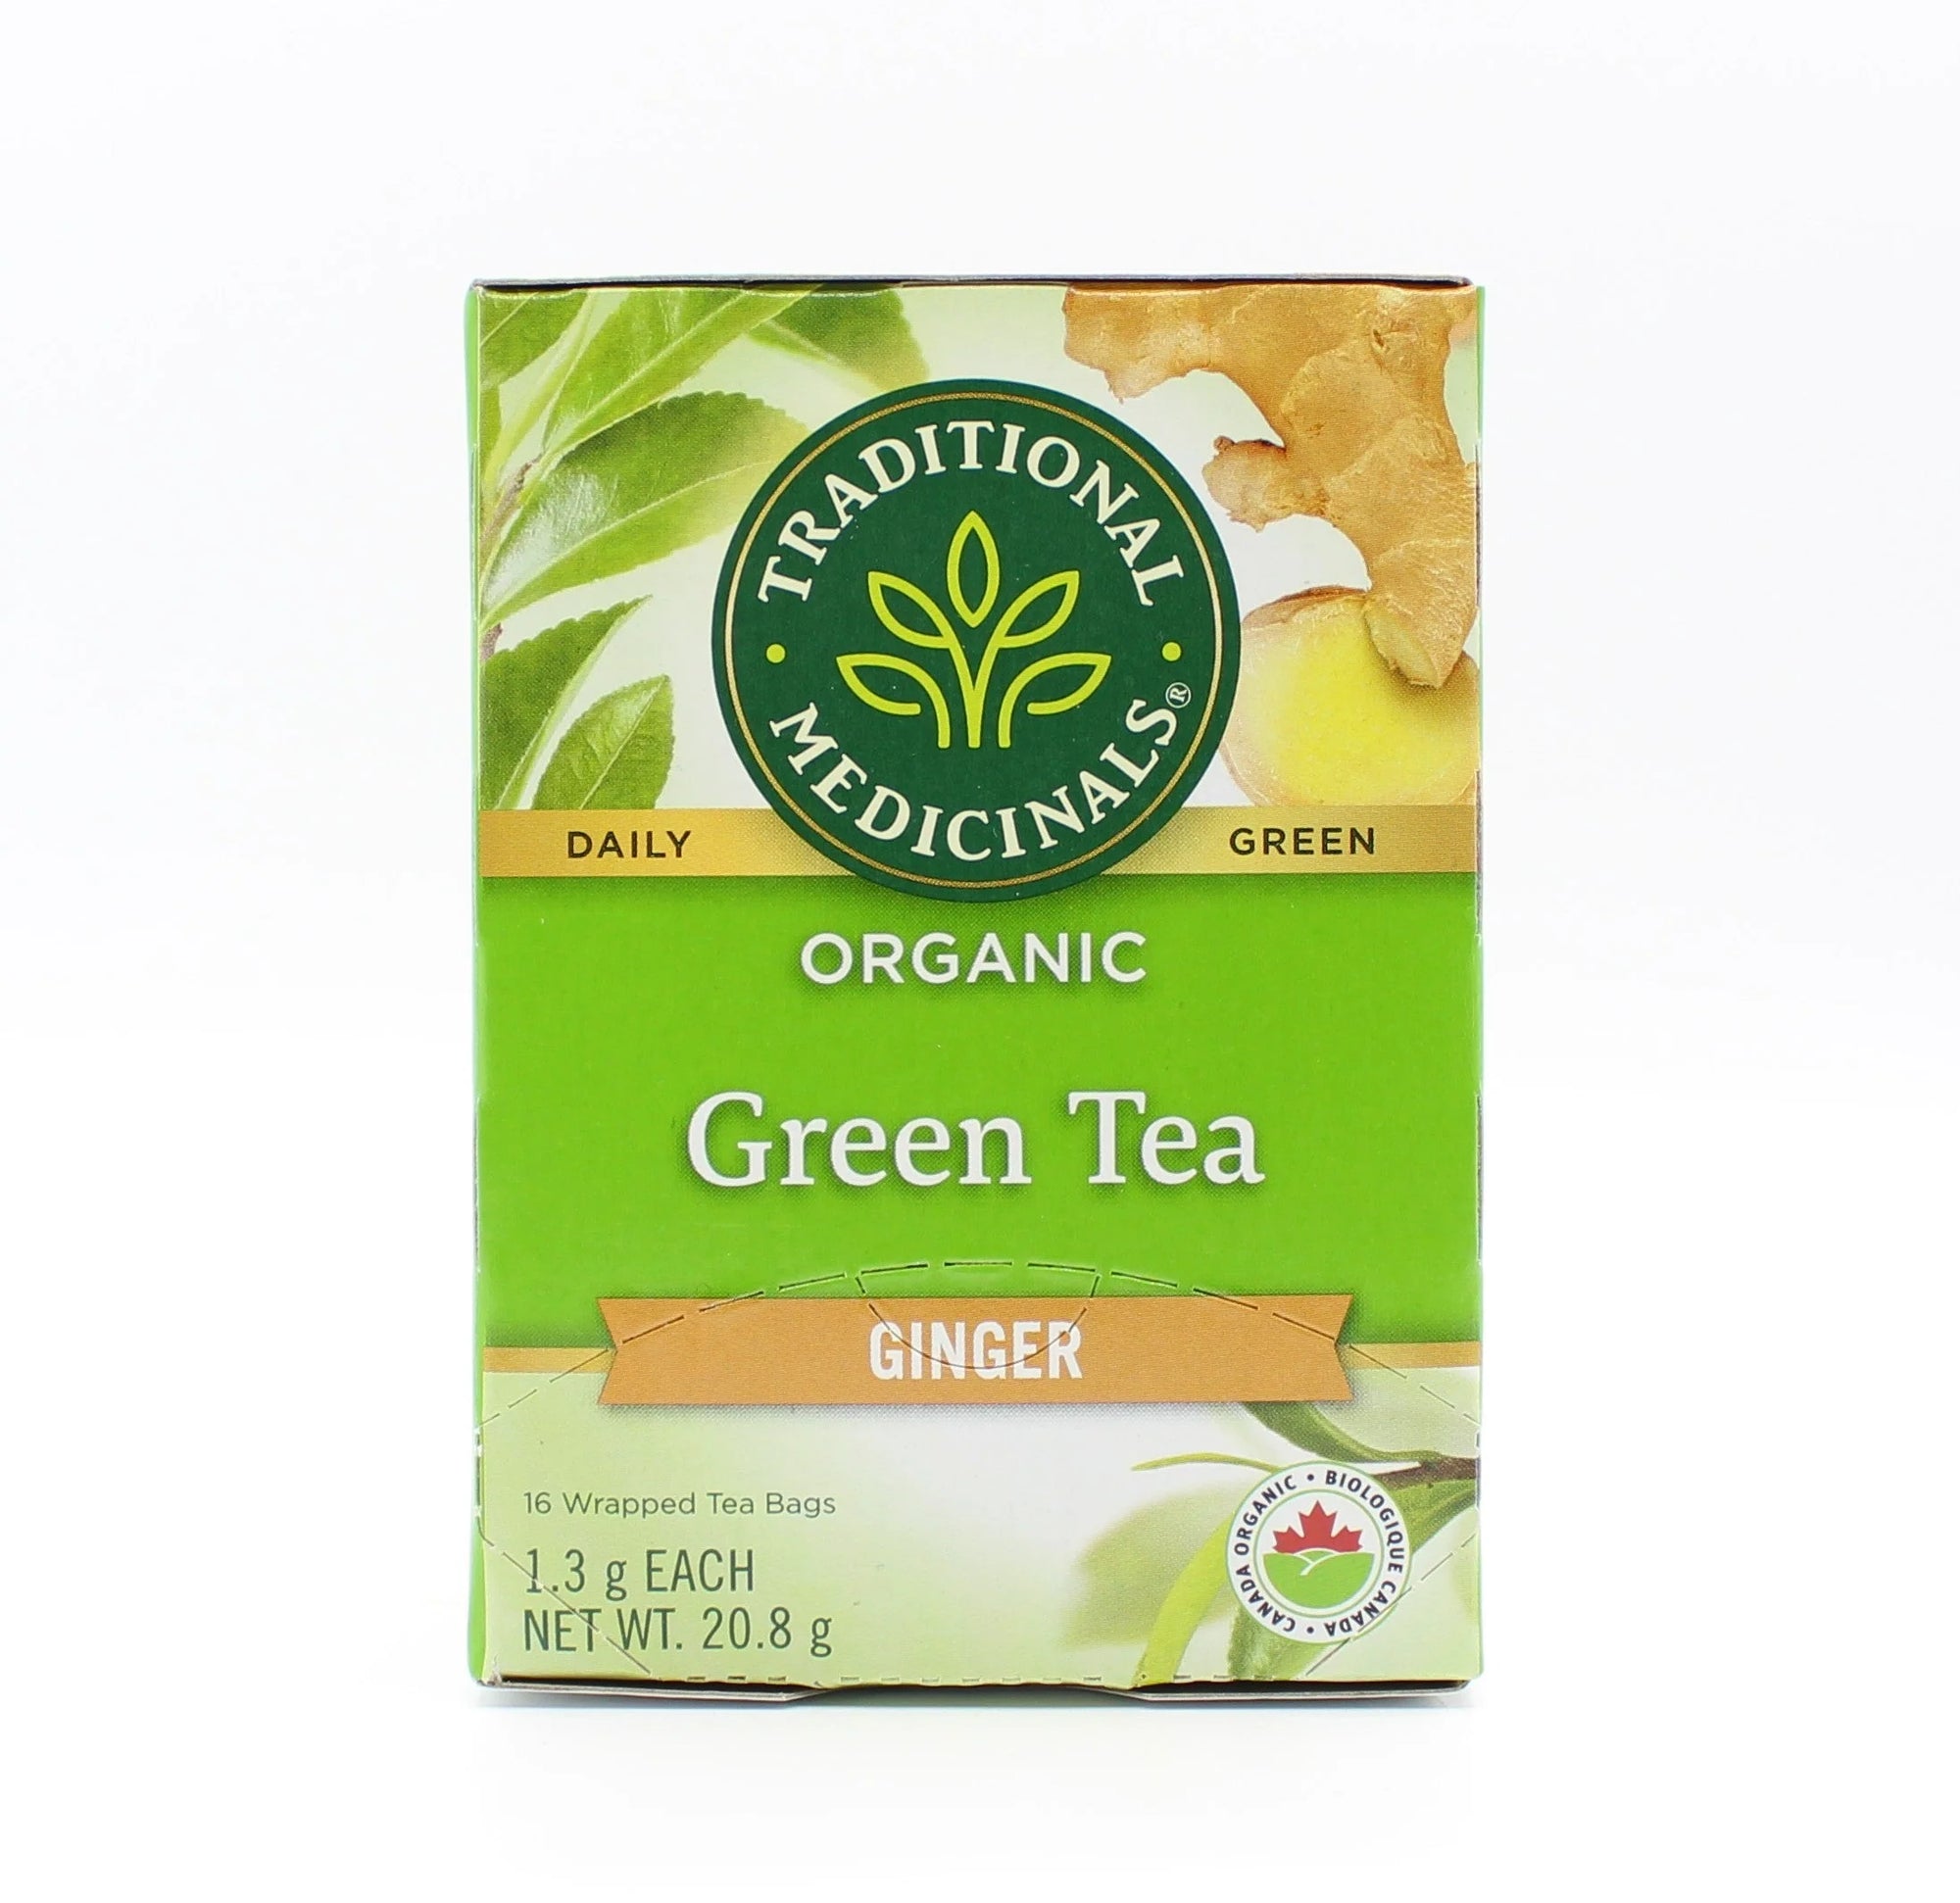 Organic Ginger Green Tea by Traditional Medicinals, 30g